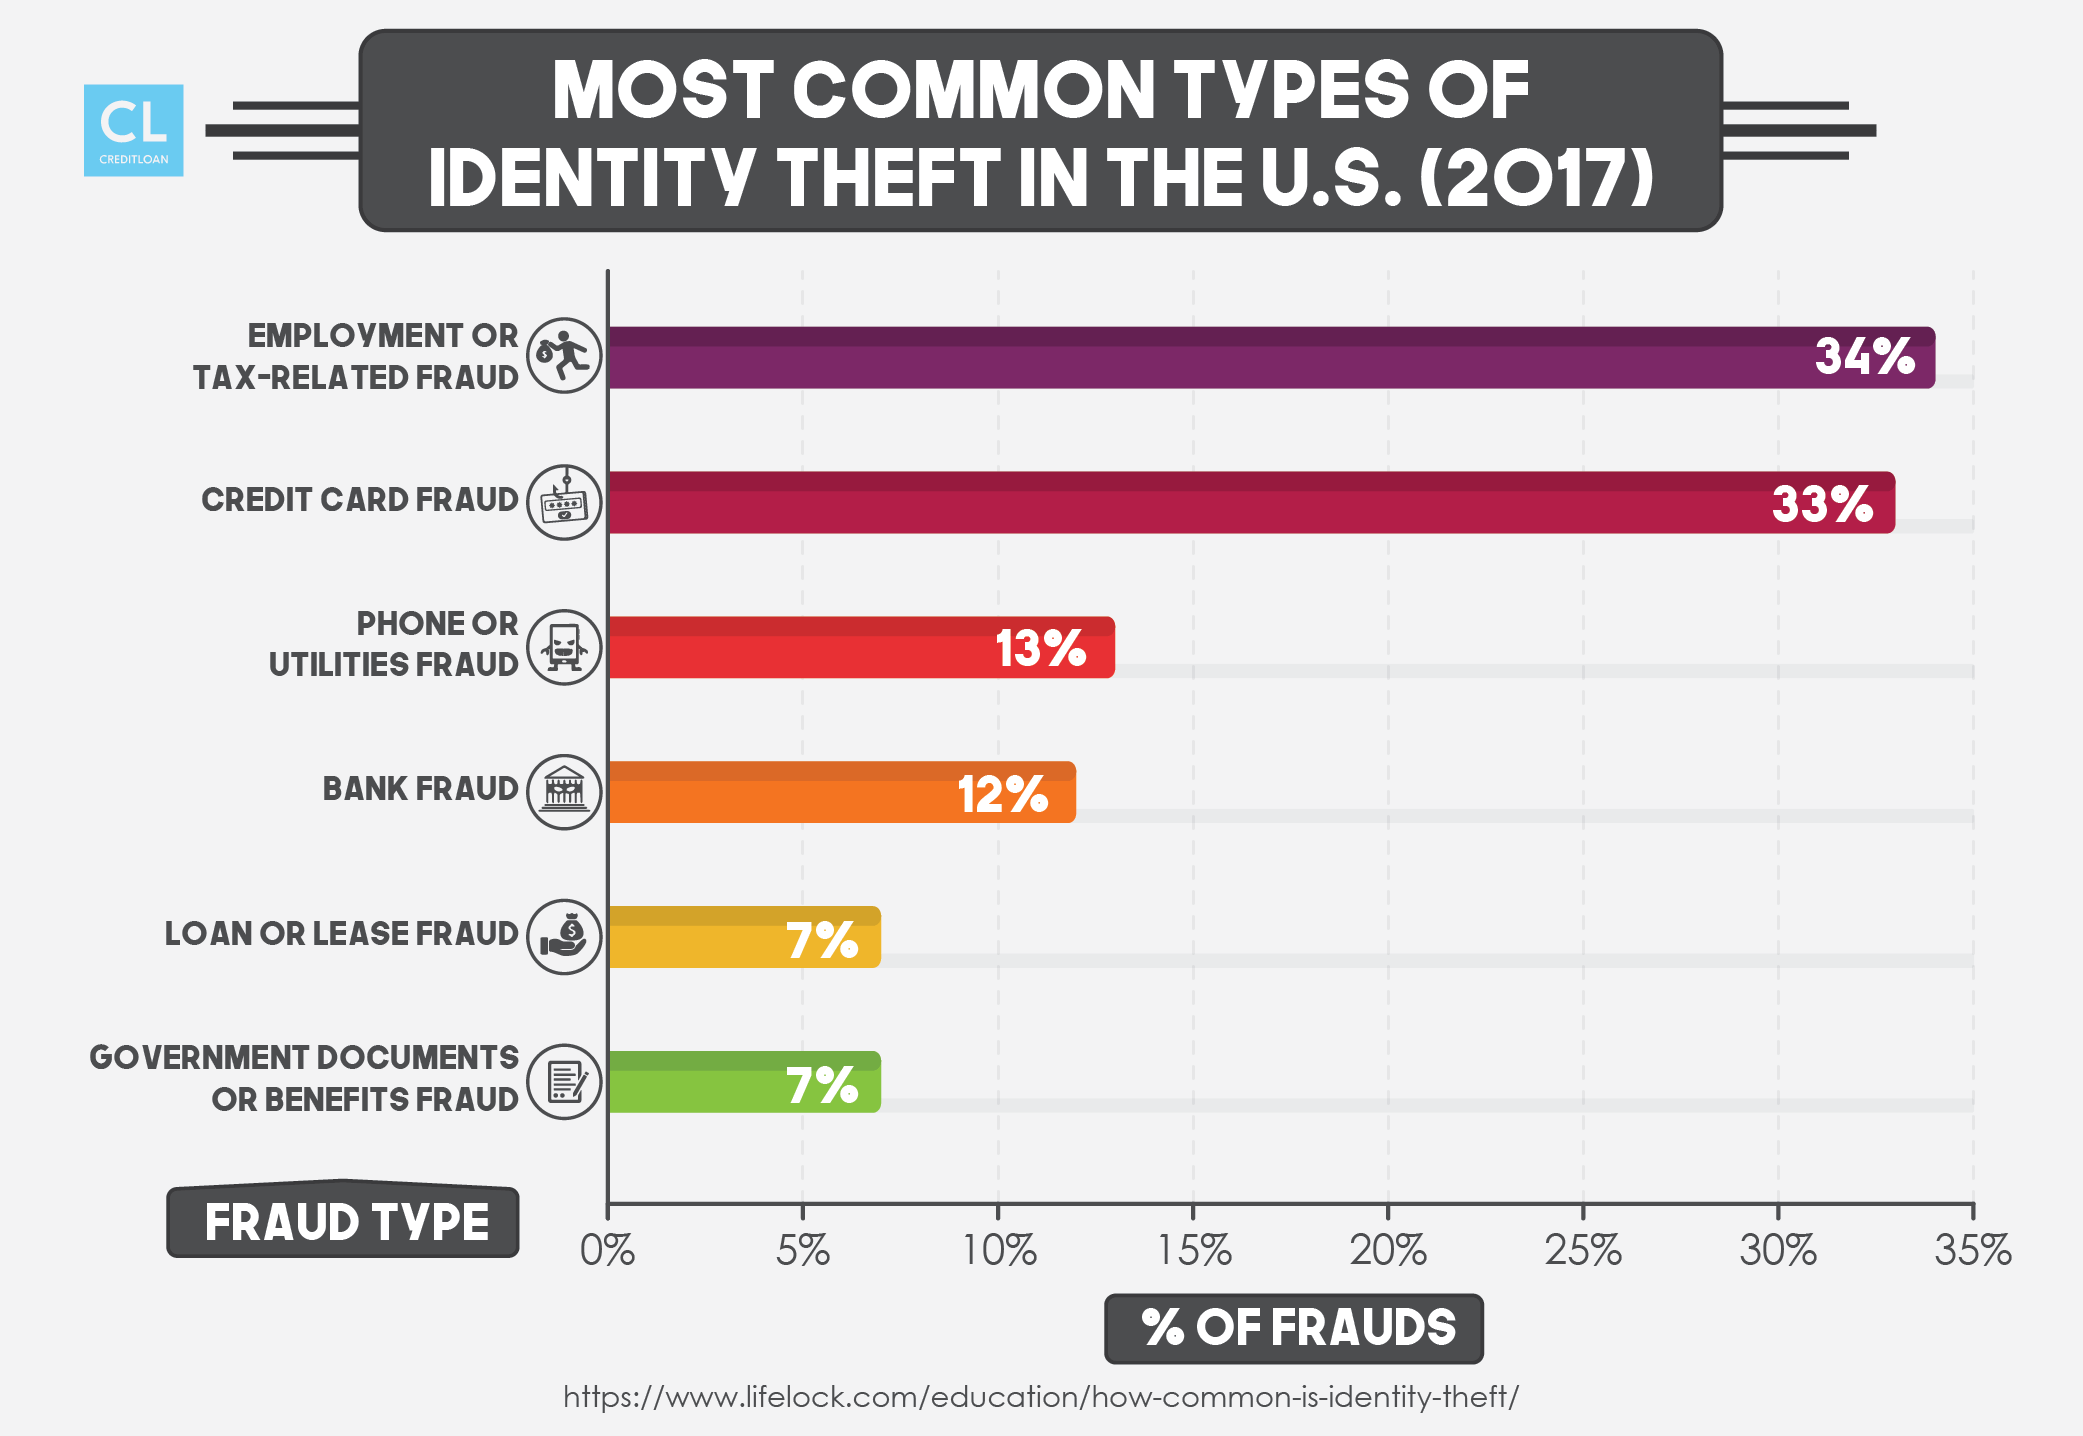 Most Common Types of Identity Theft in the U.S.